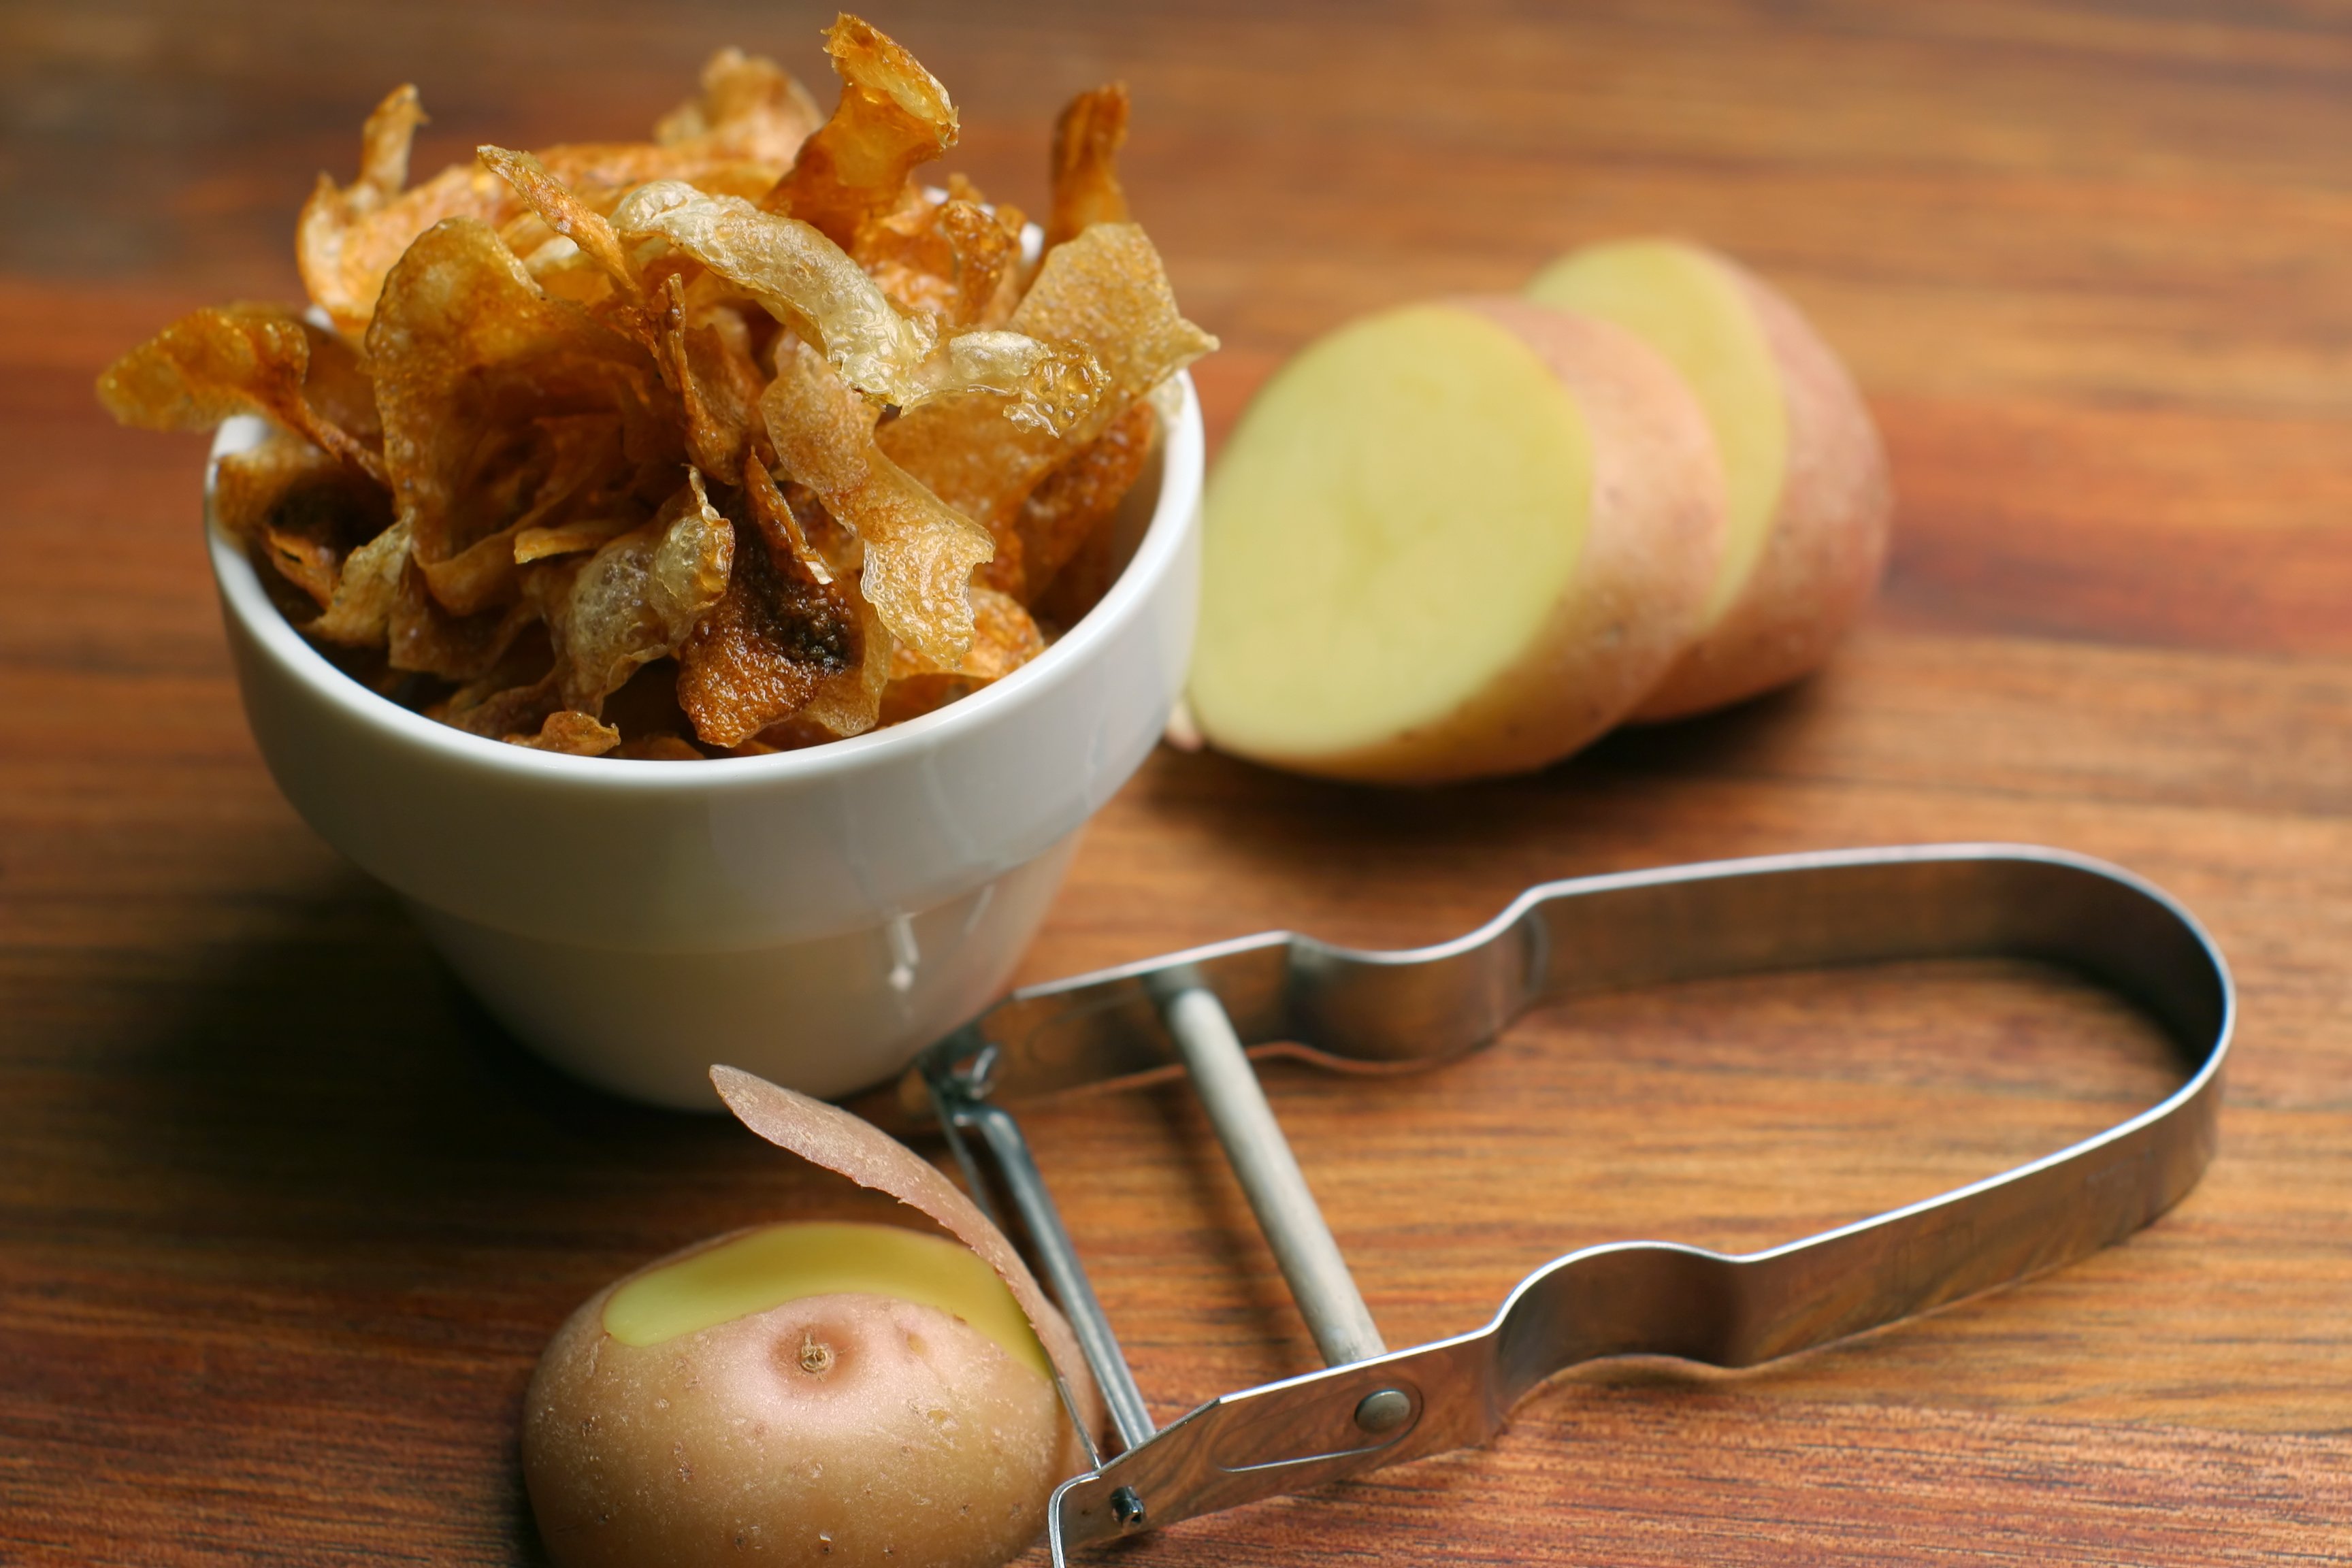 Potato chips are perfect for using up leftover potato skin. (iStock Photo)